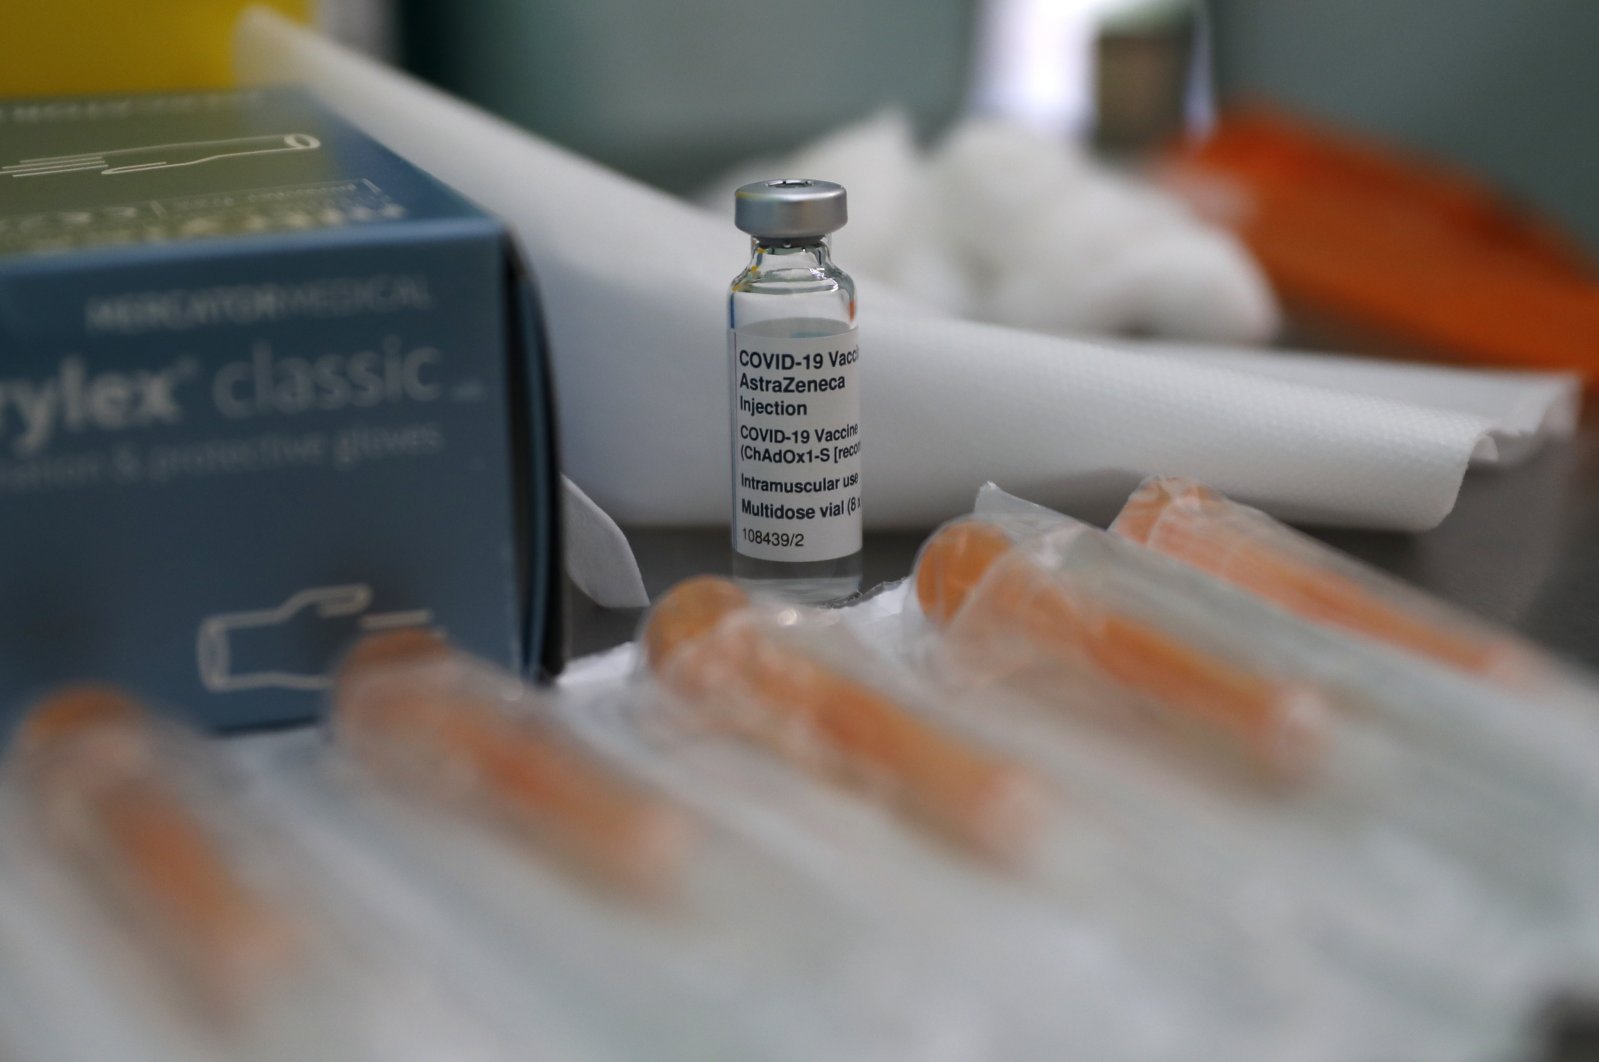 A vial of the AstraZeneca coronavirus vaccine ready for use during the pilot project pop-up vaccination drive 'Vaxi Taxi' in Kilburn, London, Feb. 28, 2021. (AP Photo)